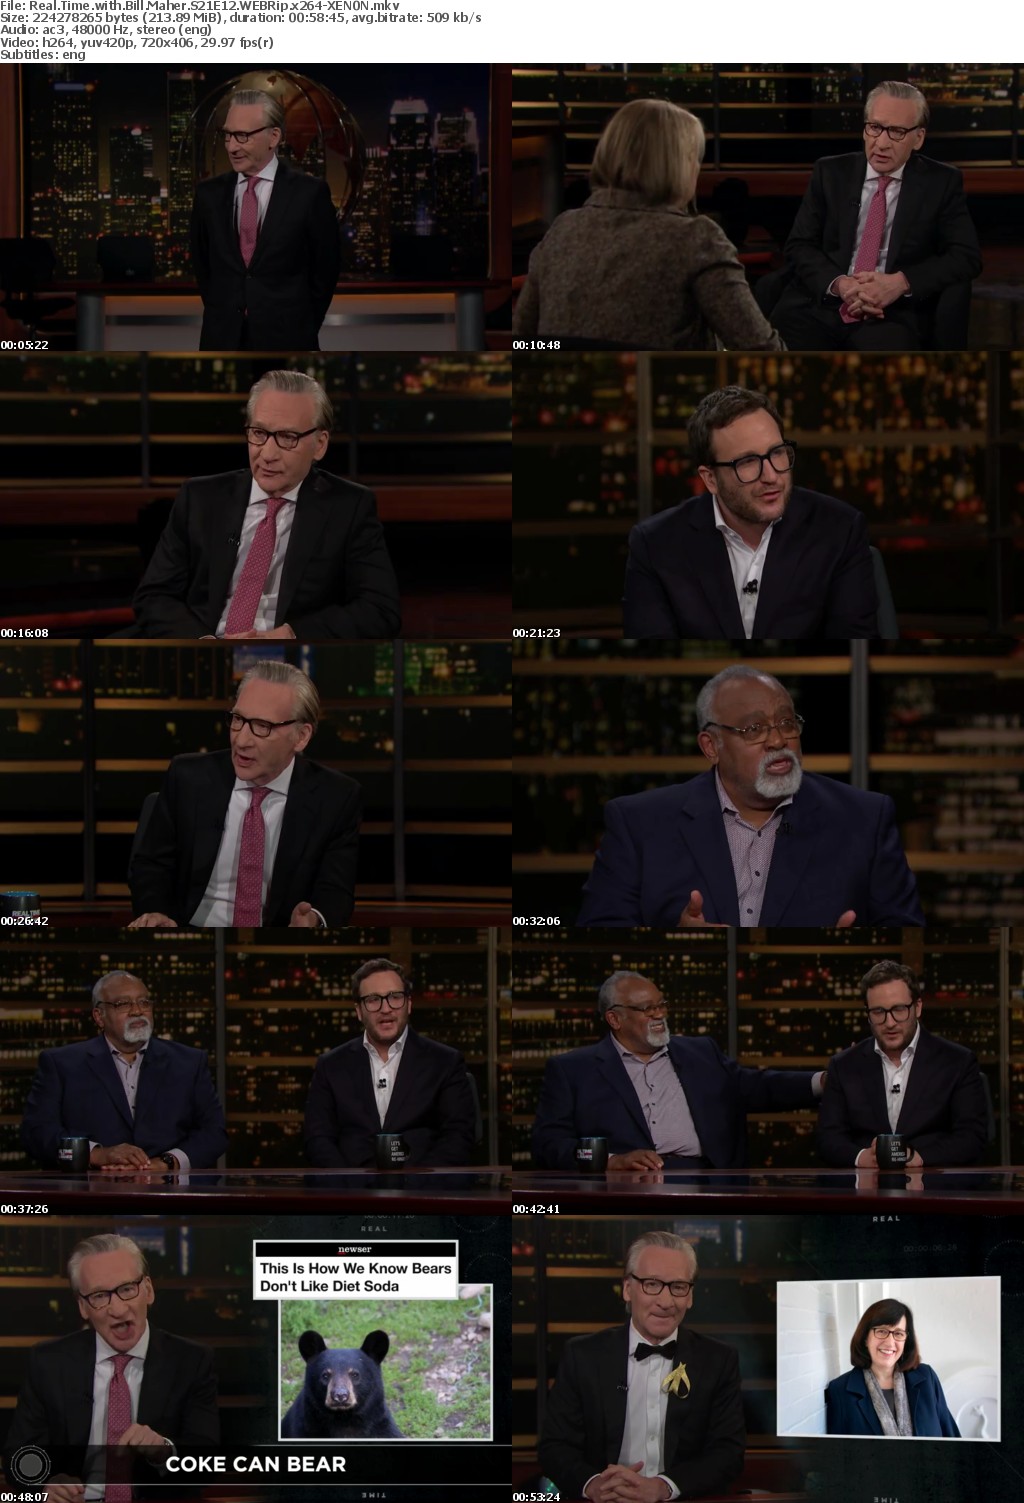 Real Time with Bill Maher S21E12 WEBRip x264-XEN0N